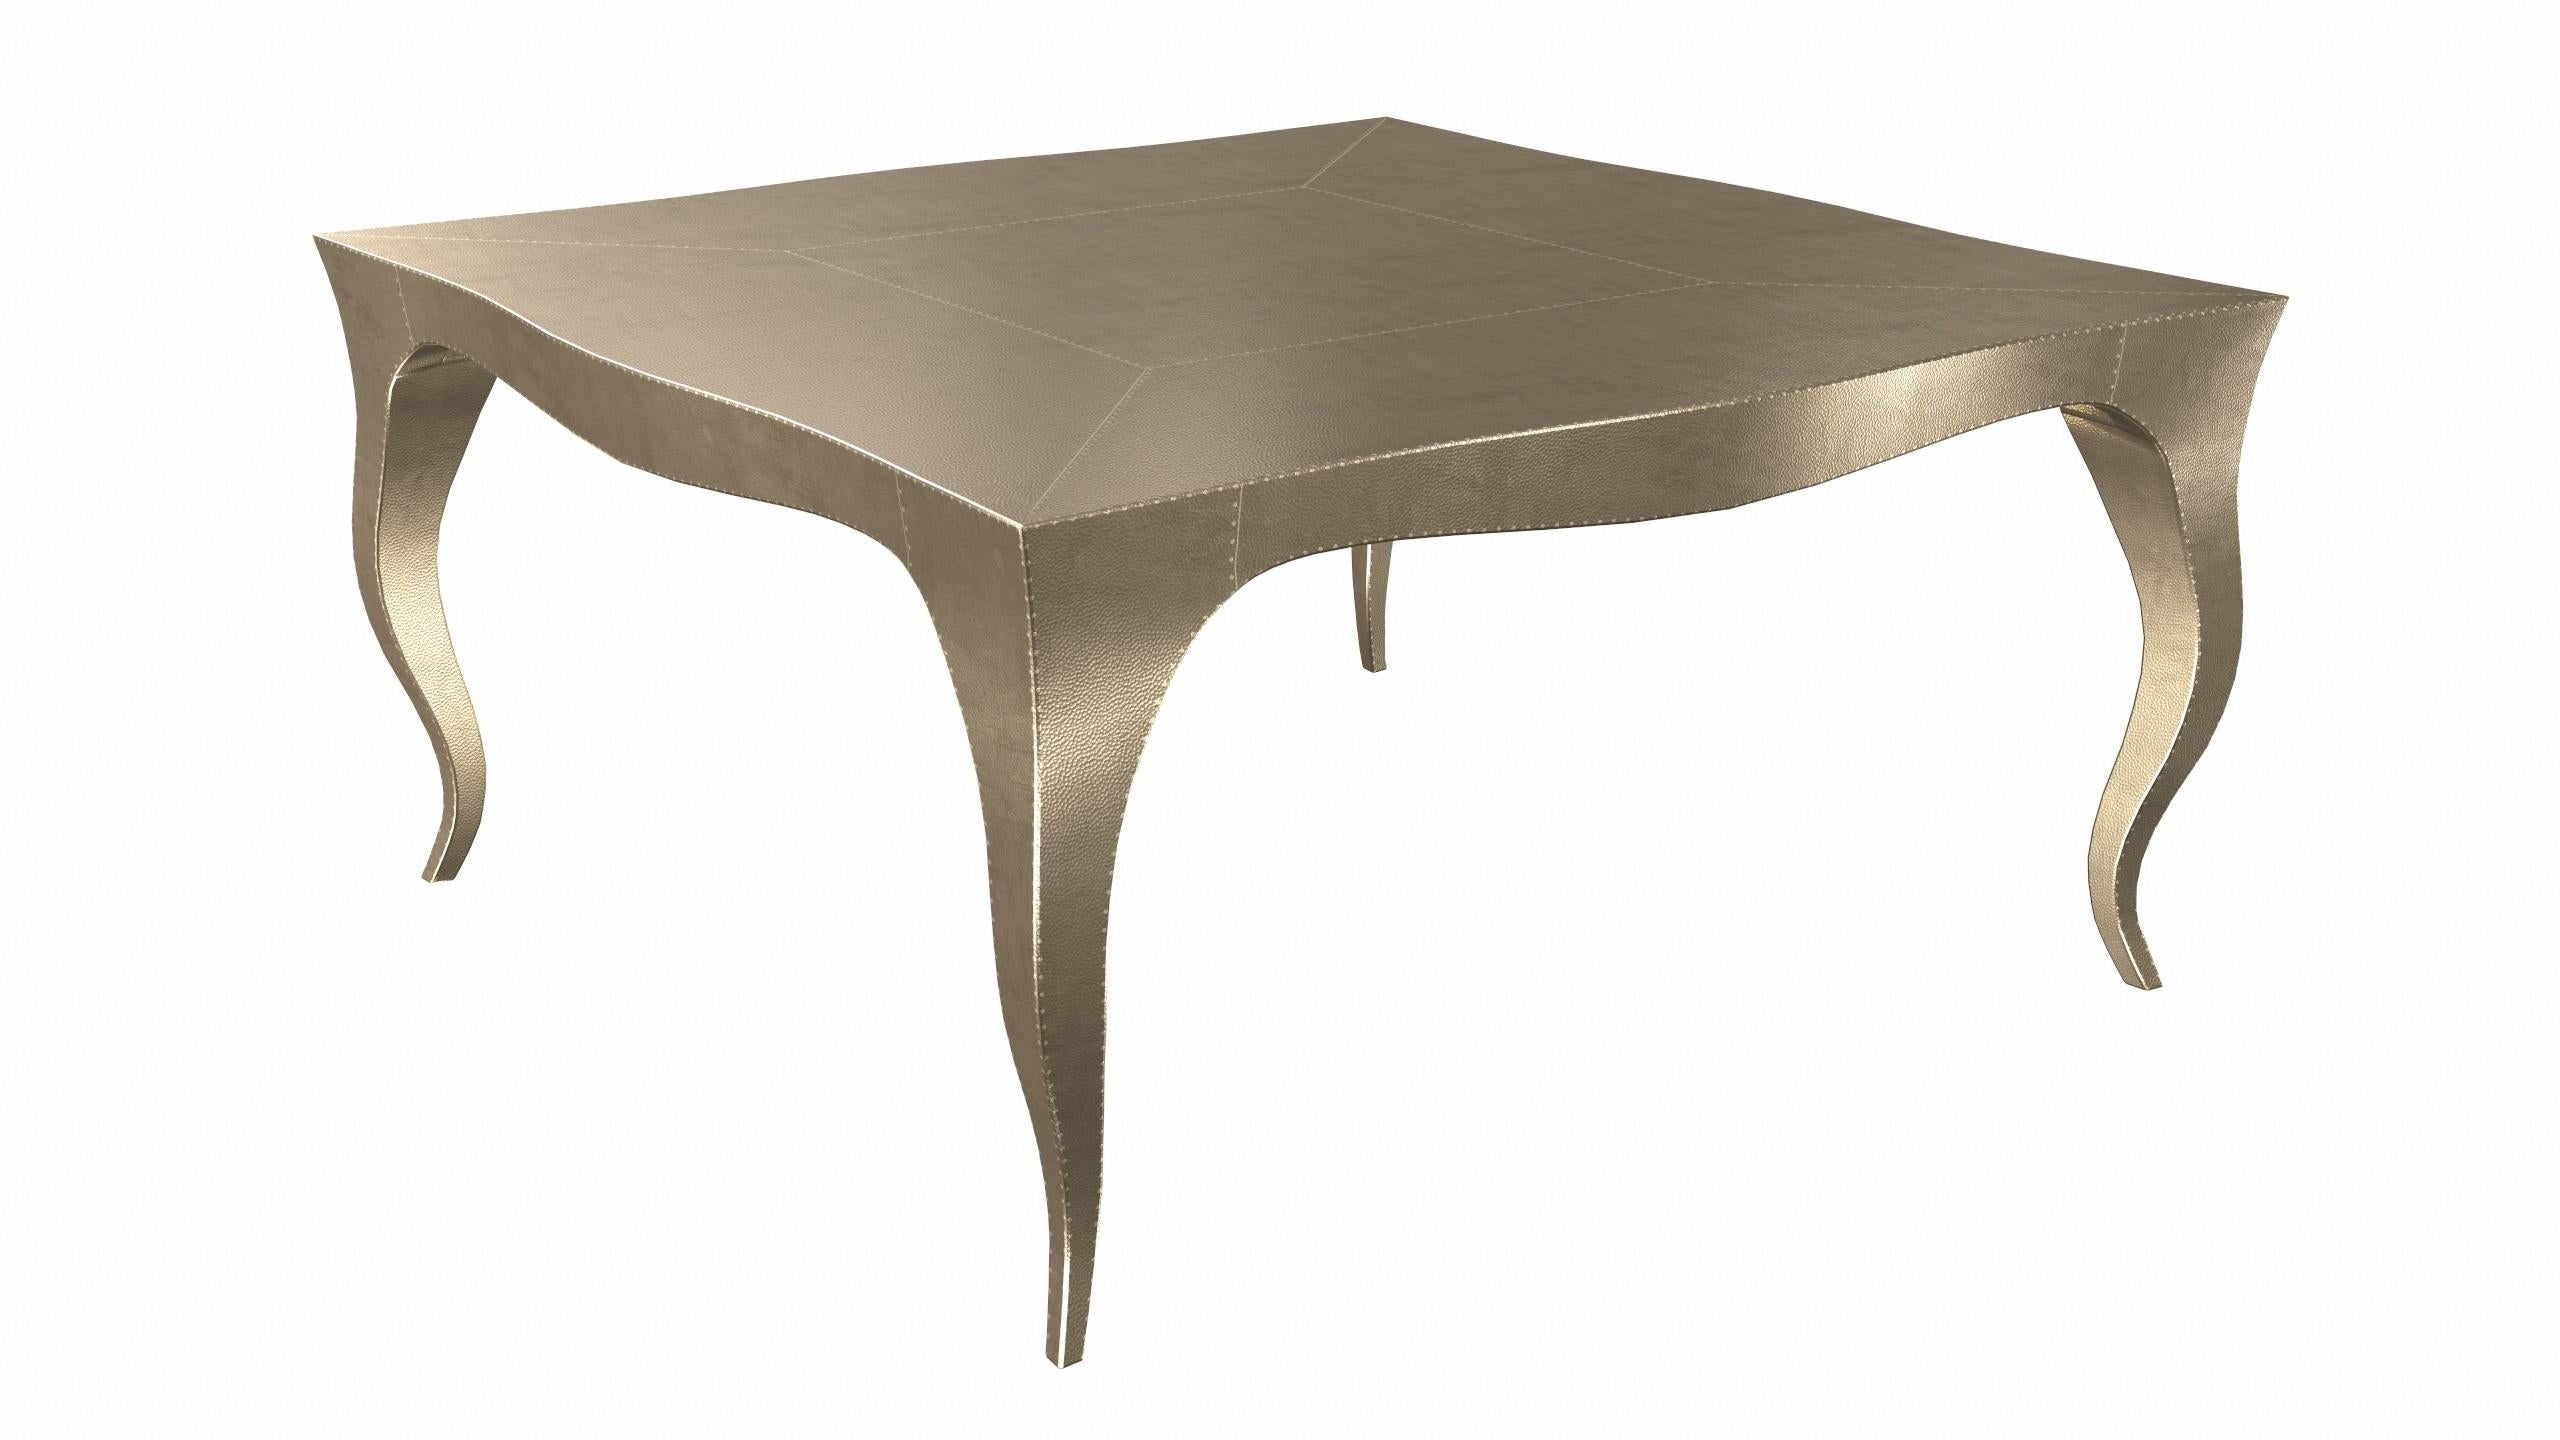 Contemporary Louise Art Deco Nesting Tables and Stacking Tables Mid. Hammered Brass by Paul M For Sale